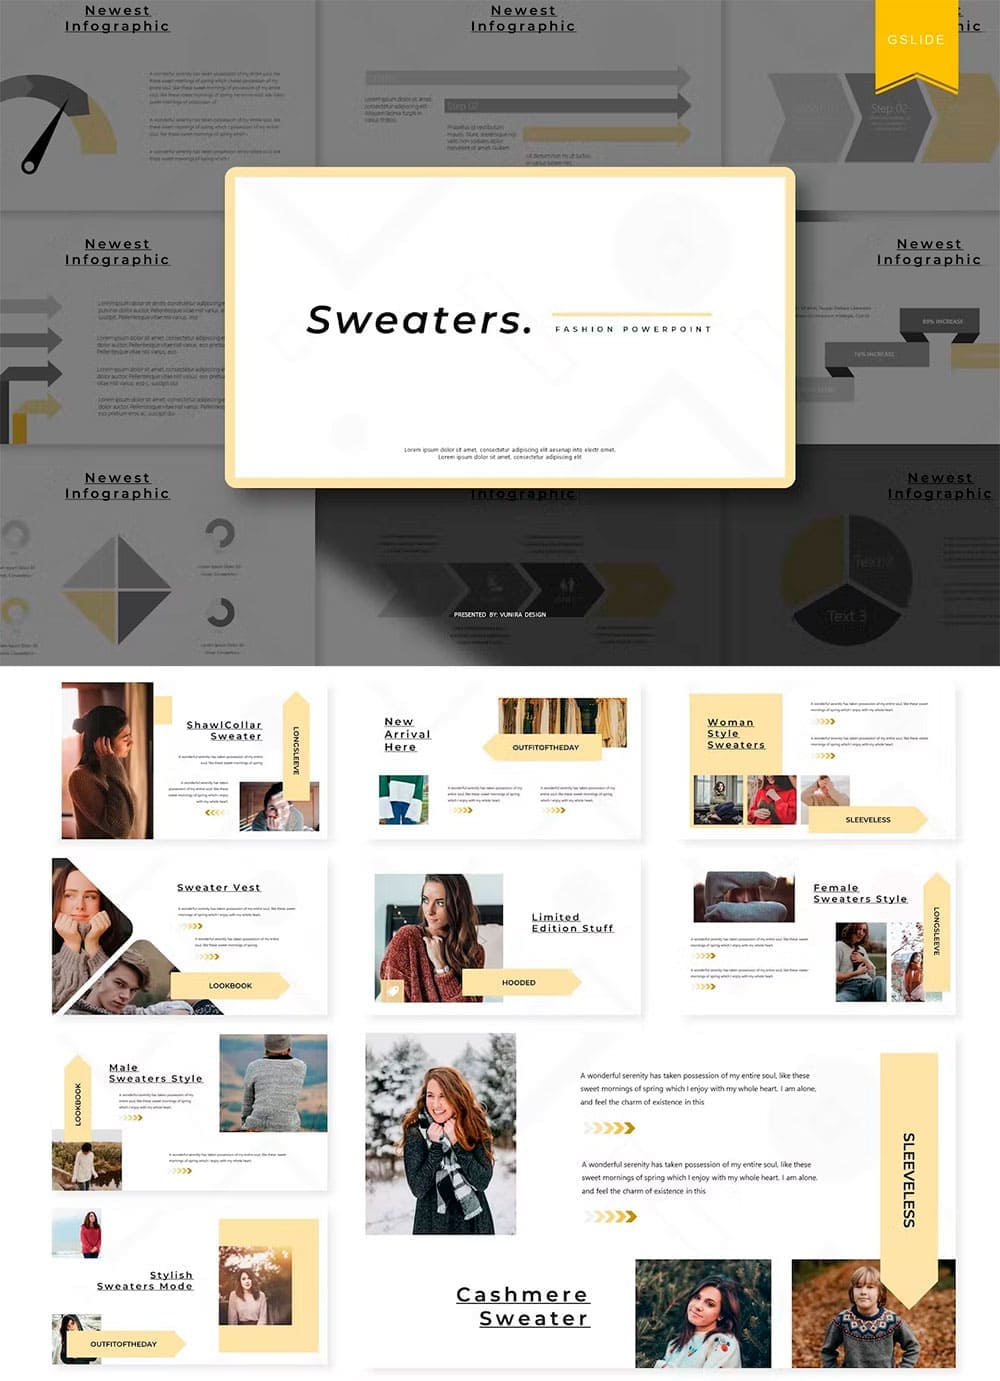 Sweaters google slides template, picture for pinterest.